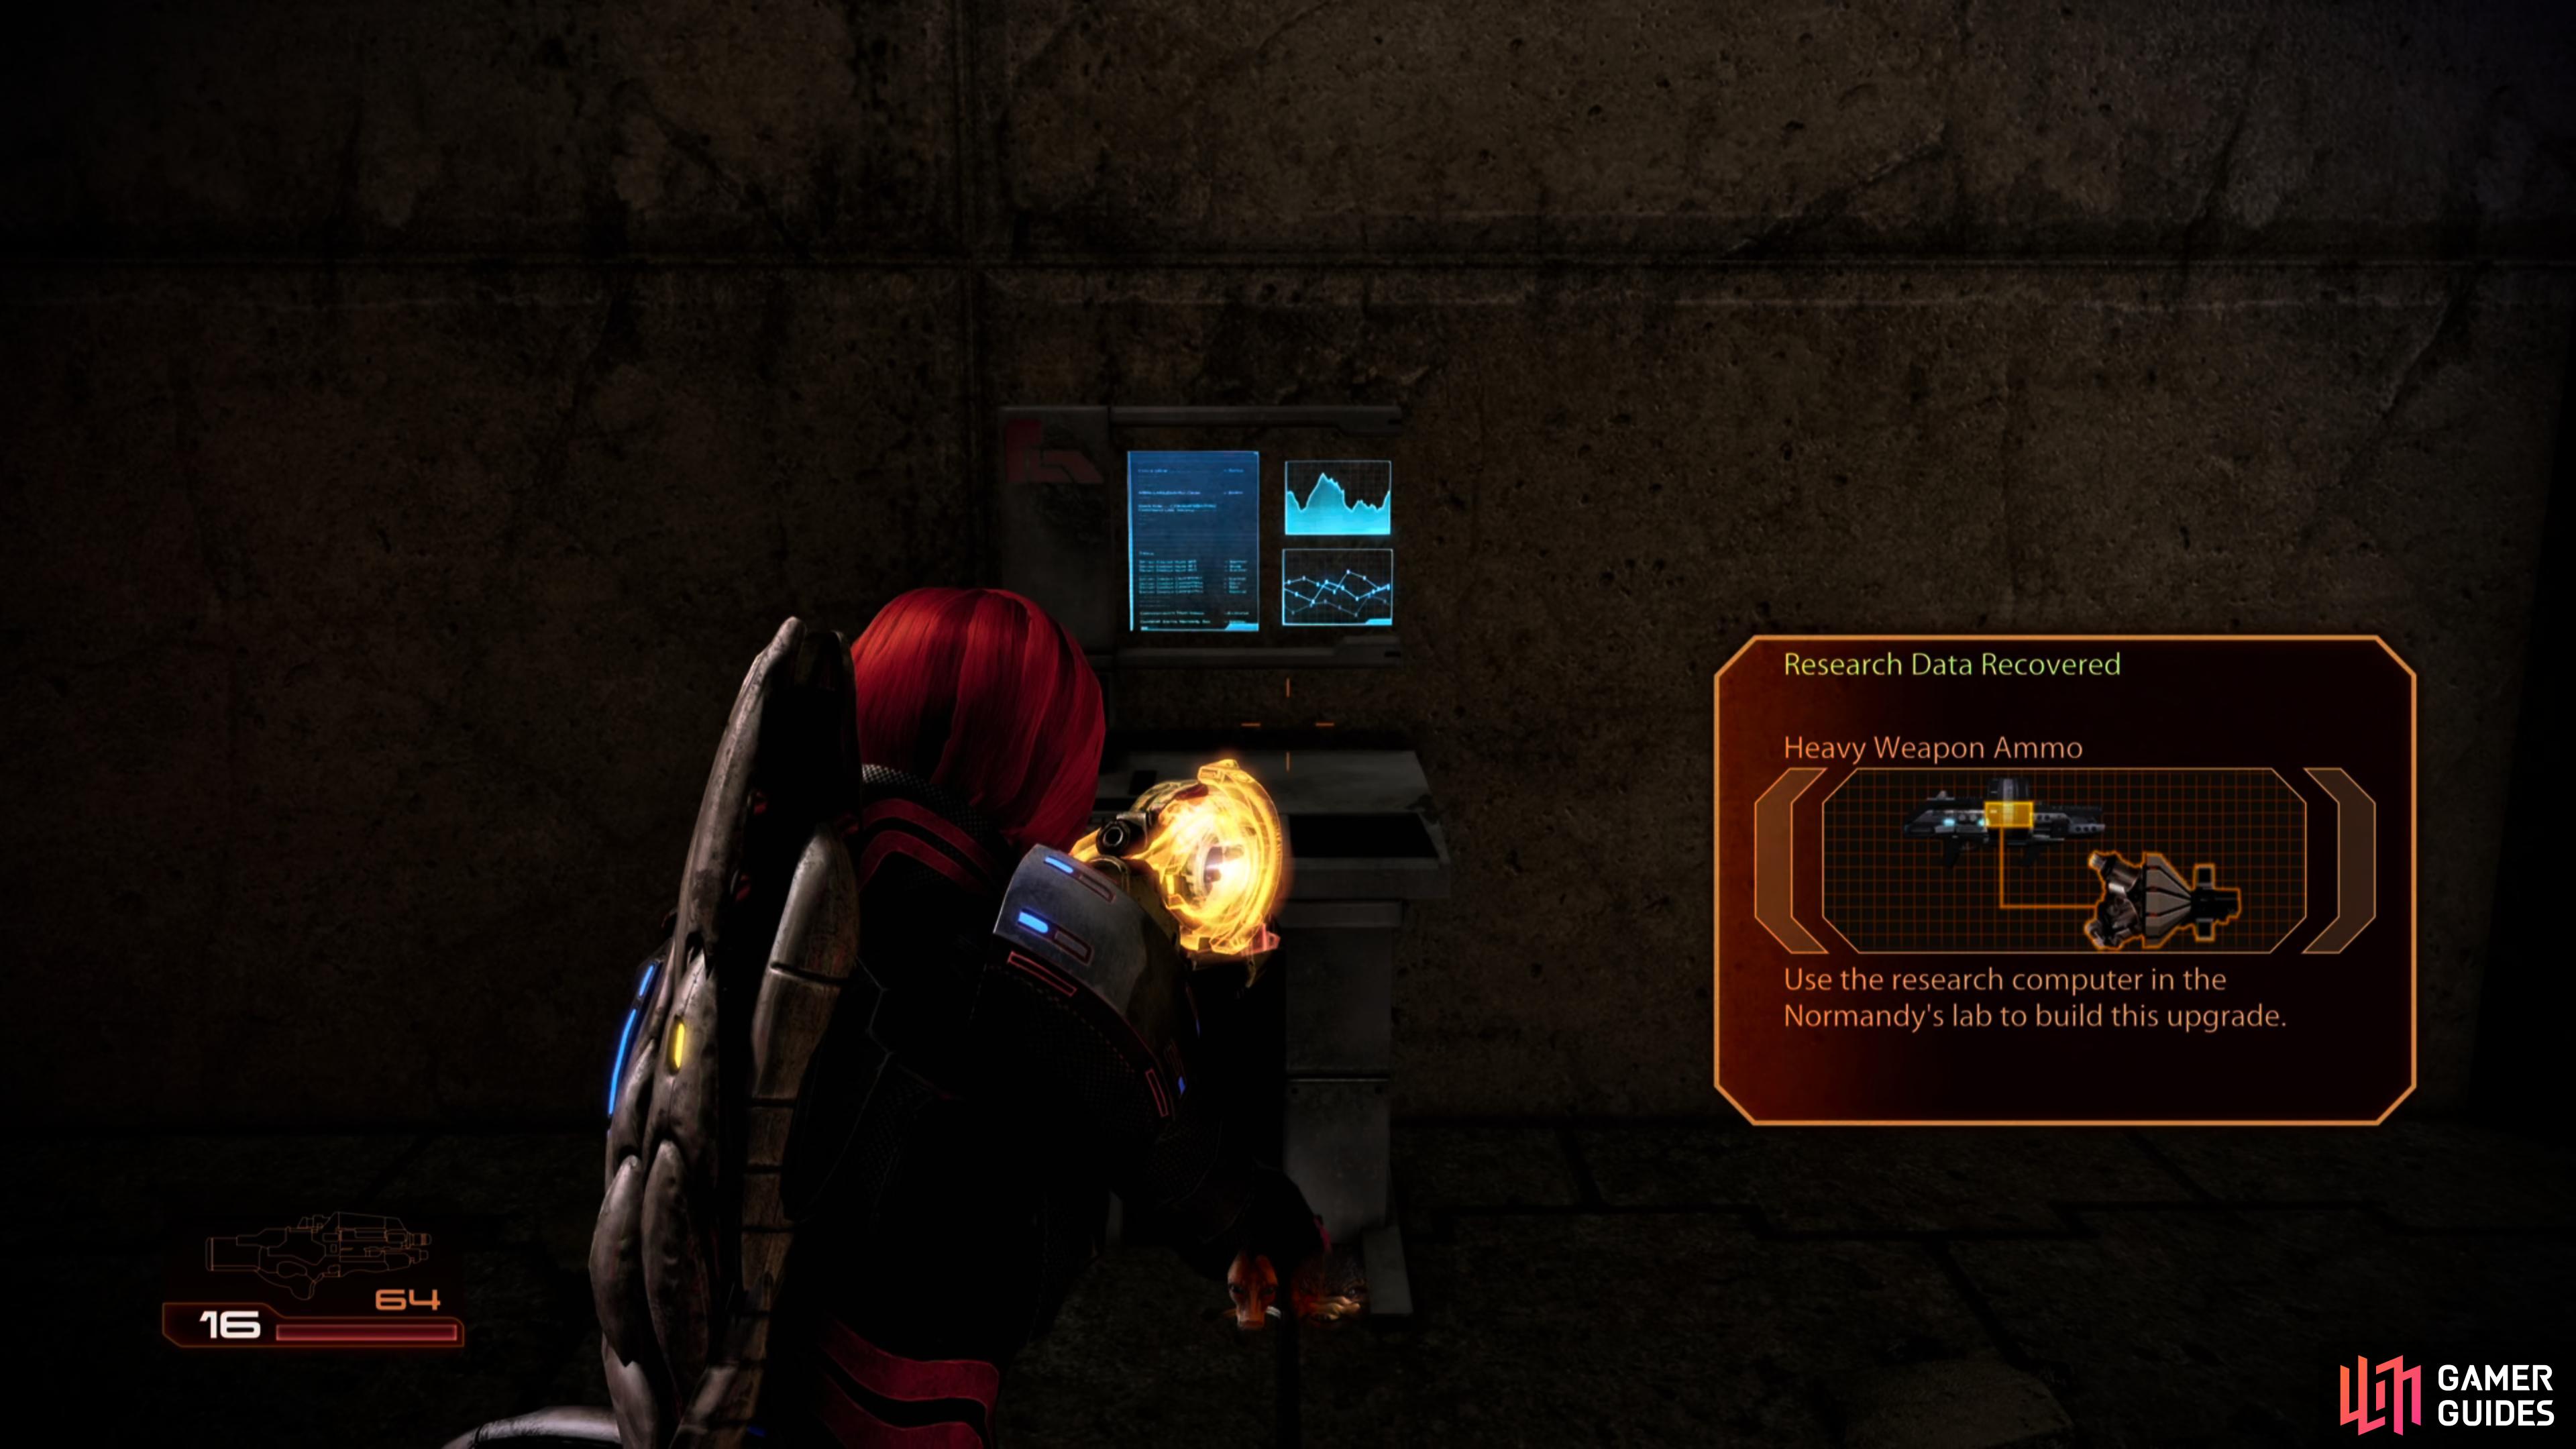 then pick up a Heavy Weapon Ammo research project.